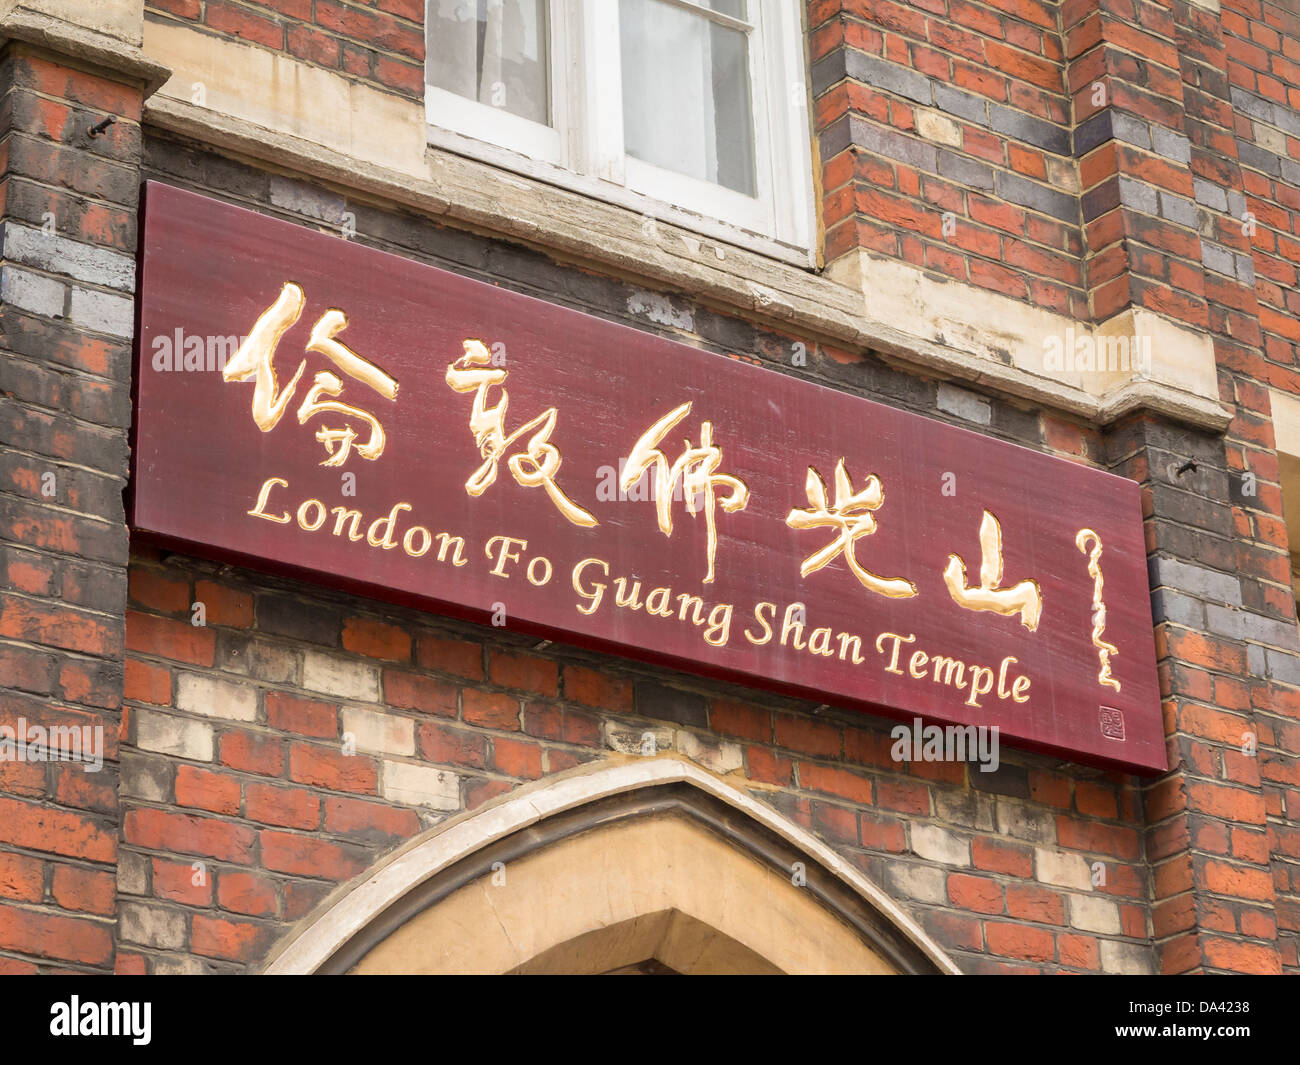 Temple Fo Guang Shan signe, Londres, Angleterre Banque D'Images